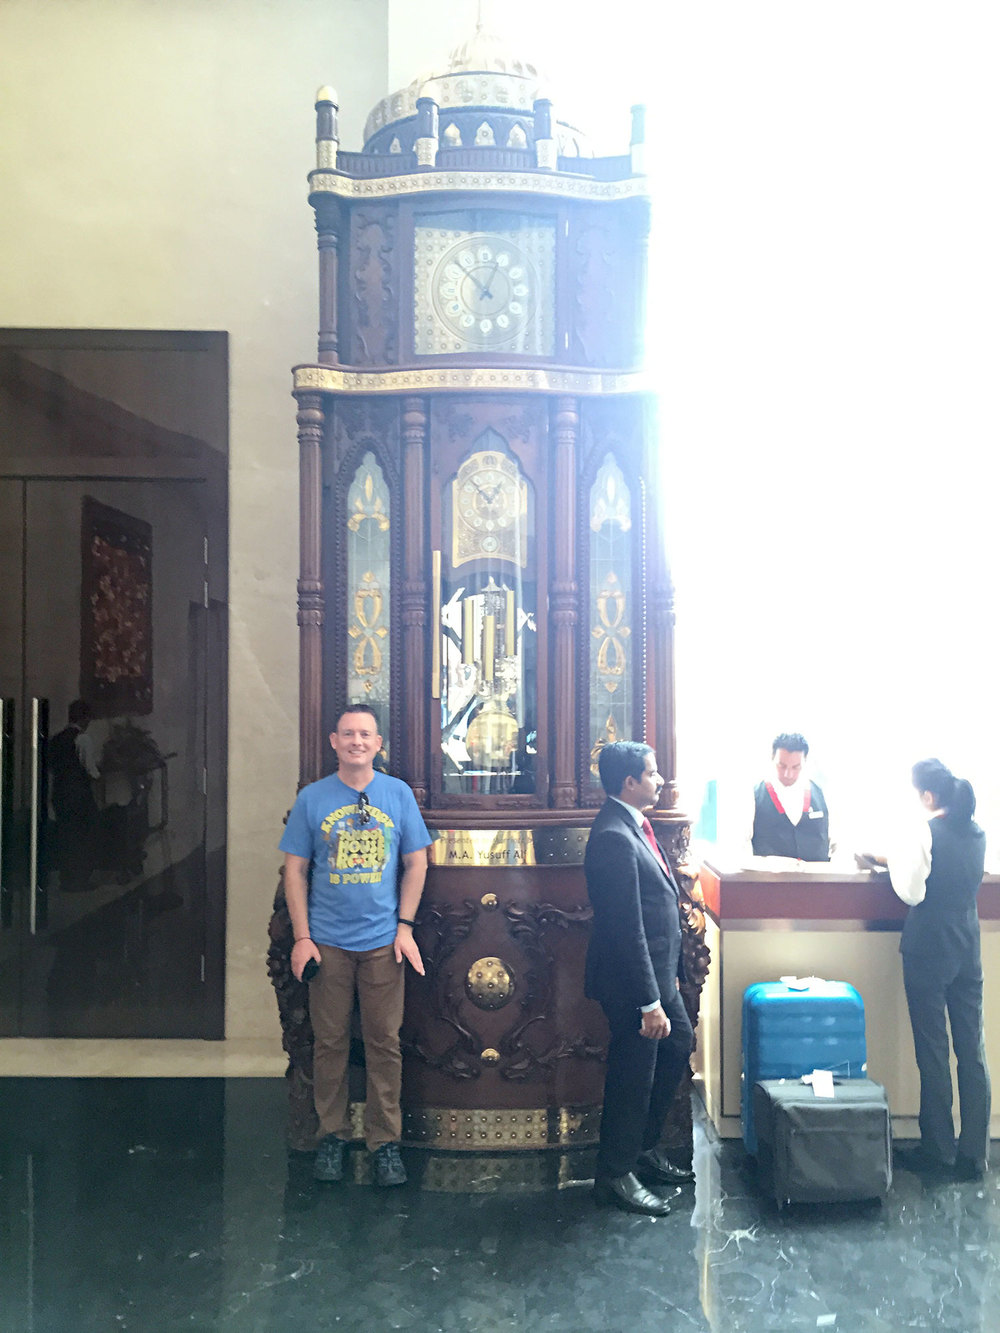 Silly photo of me in front of the largest grandfather clock I've seen in the Kochi Marriott hotel lobby.